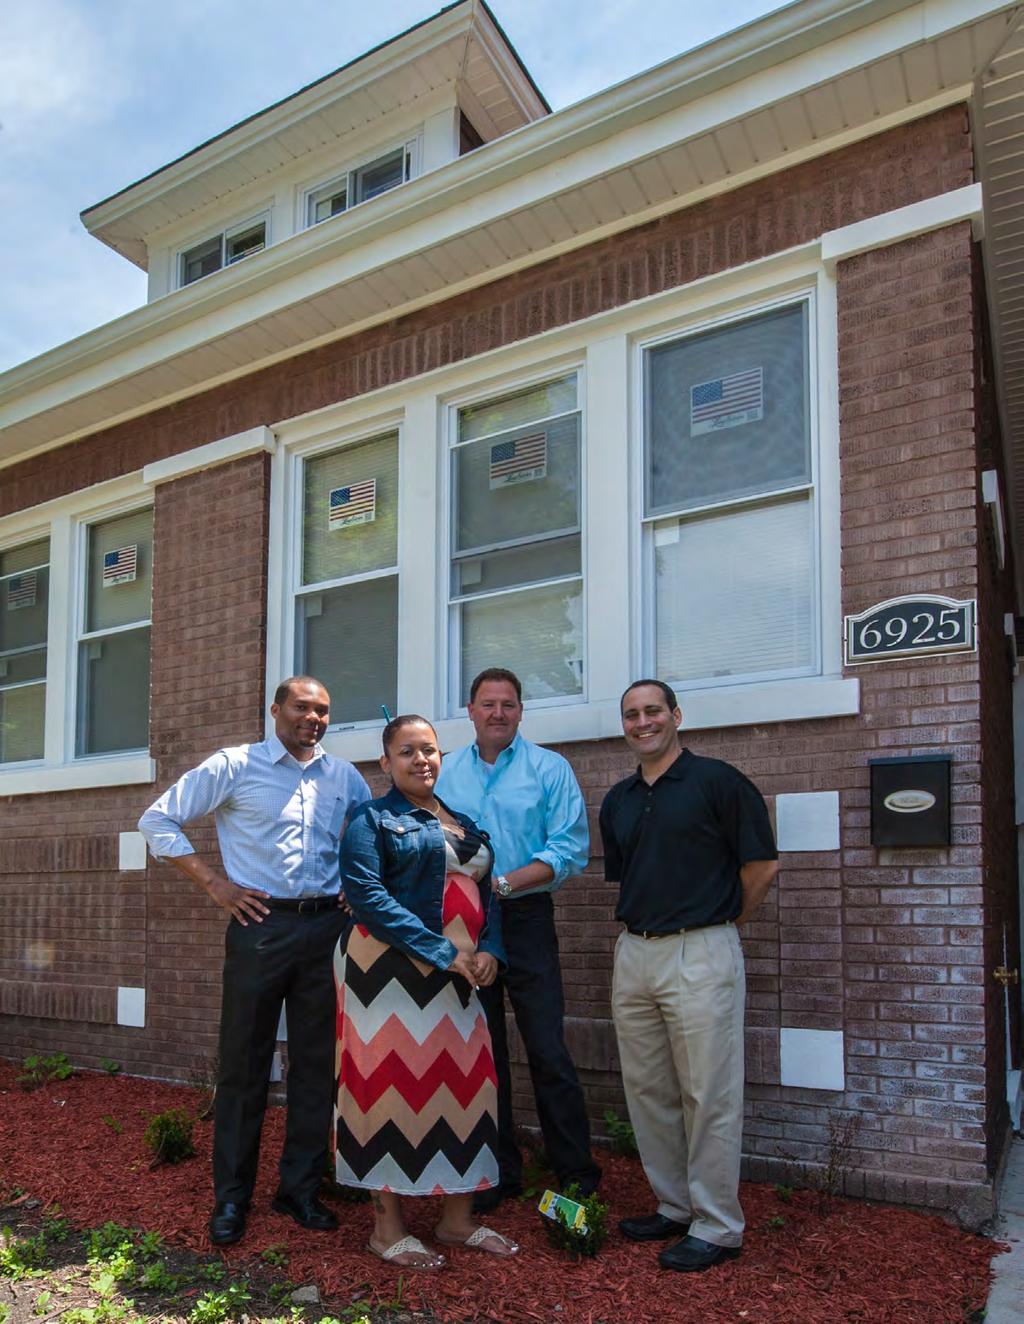 A RESTORED HOME A tenant stands in front of her new home, with (left to right) Andre Collins, who acquired the home for the Collaborative; Scott Allbright, who bought the home from the Collaborative